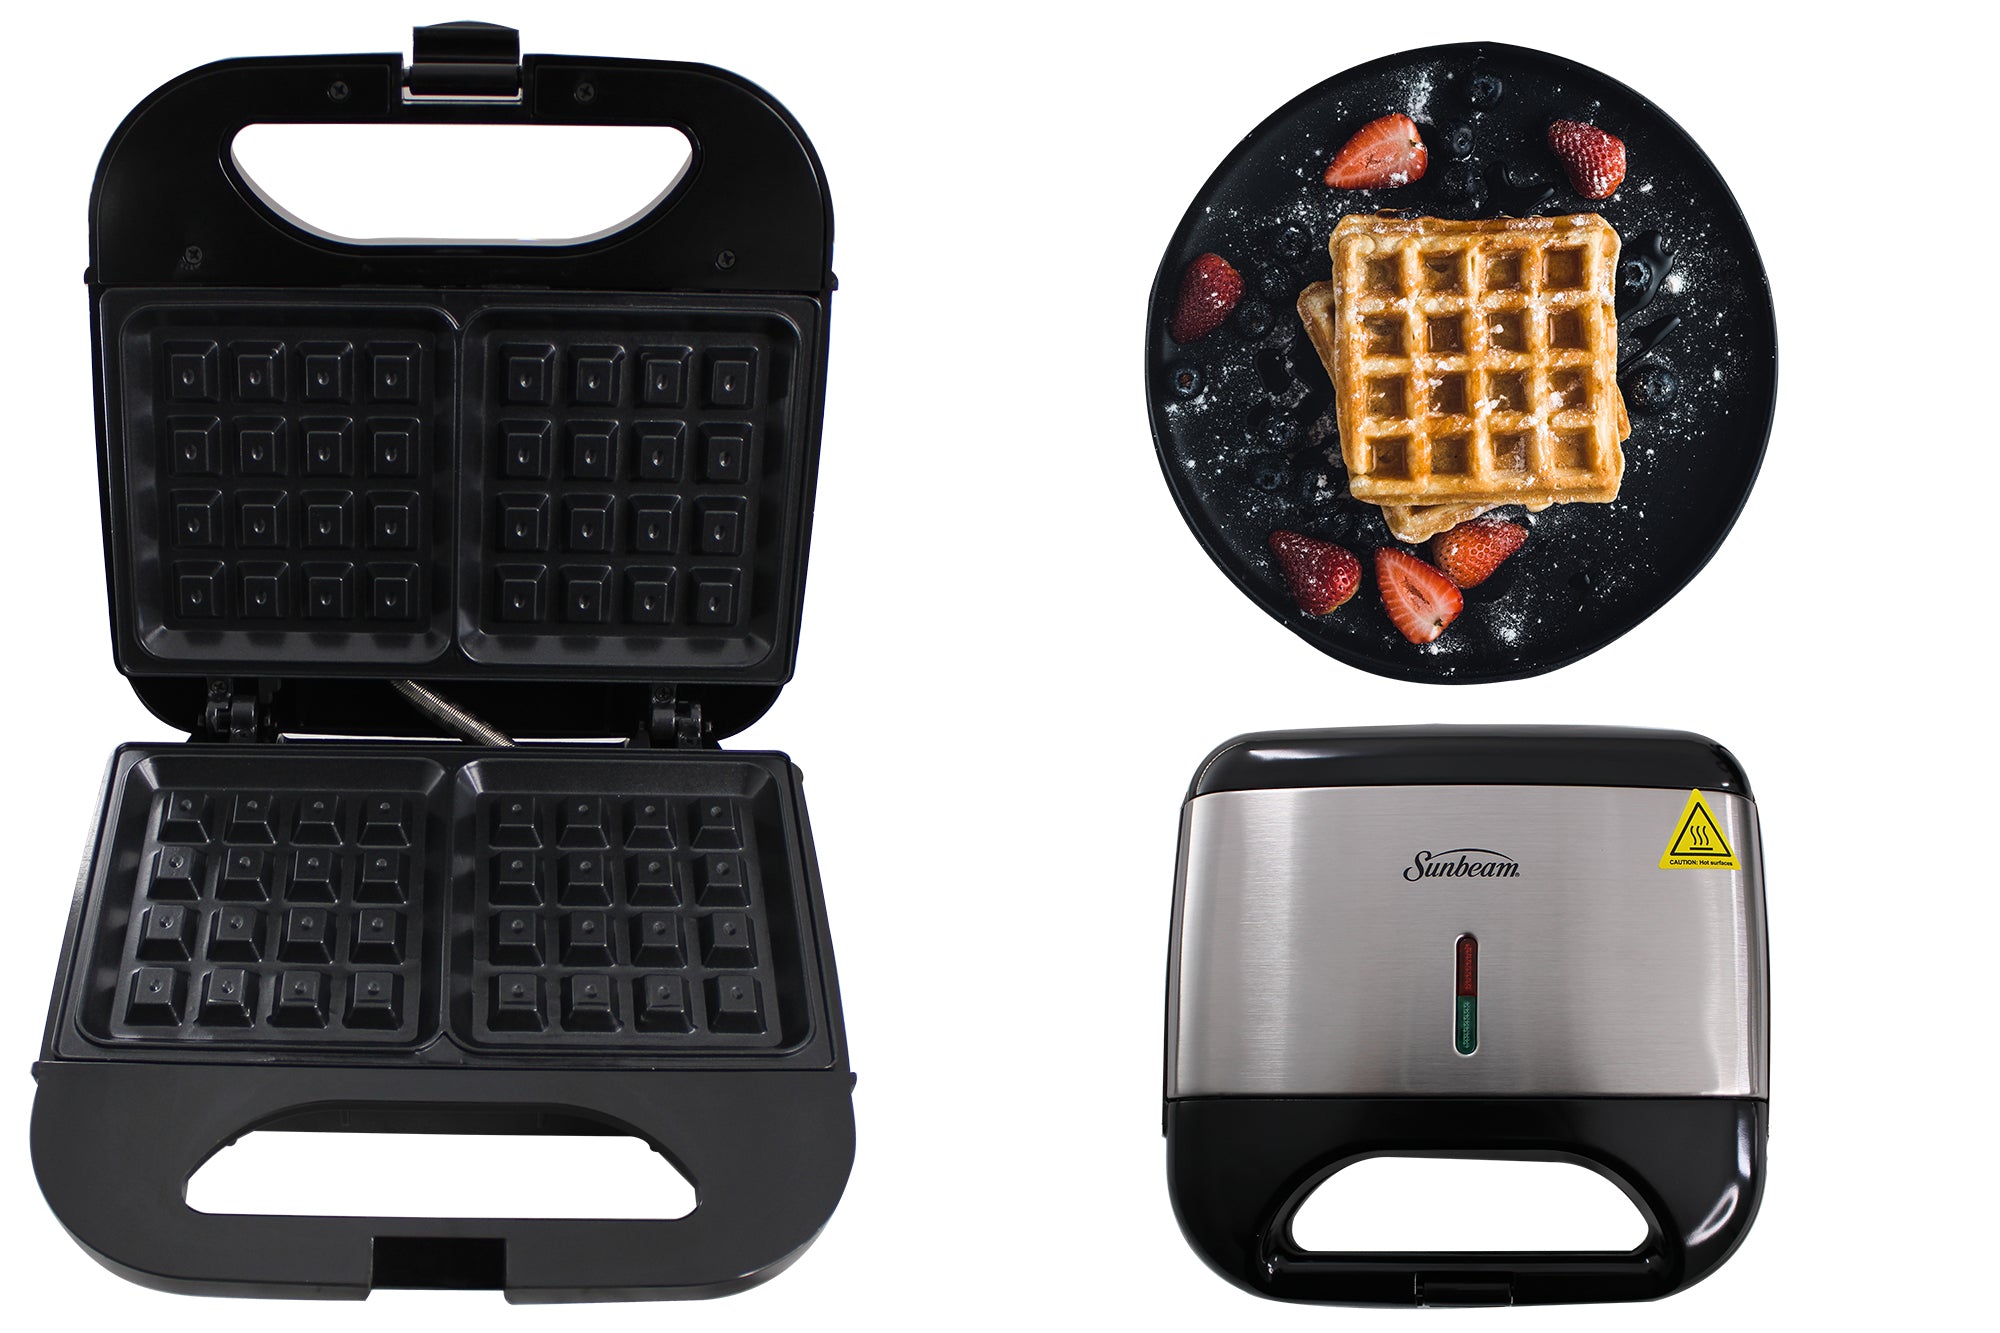 Sunbeam Stainless Steel Waffle Maker SWM-300 - Non Stick Two Slice